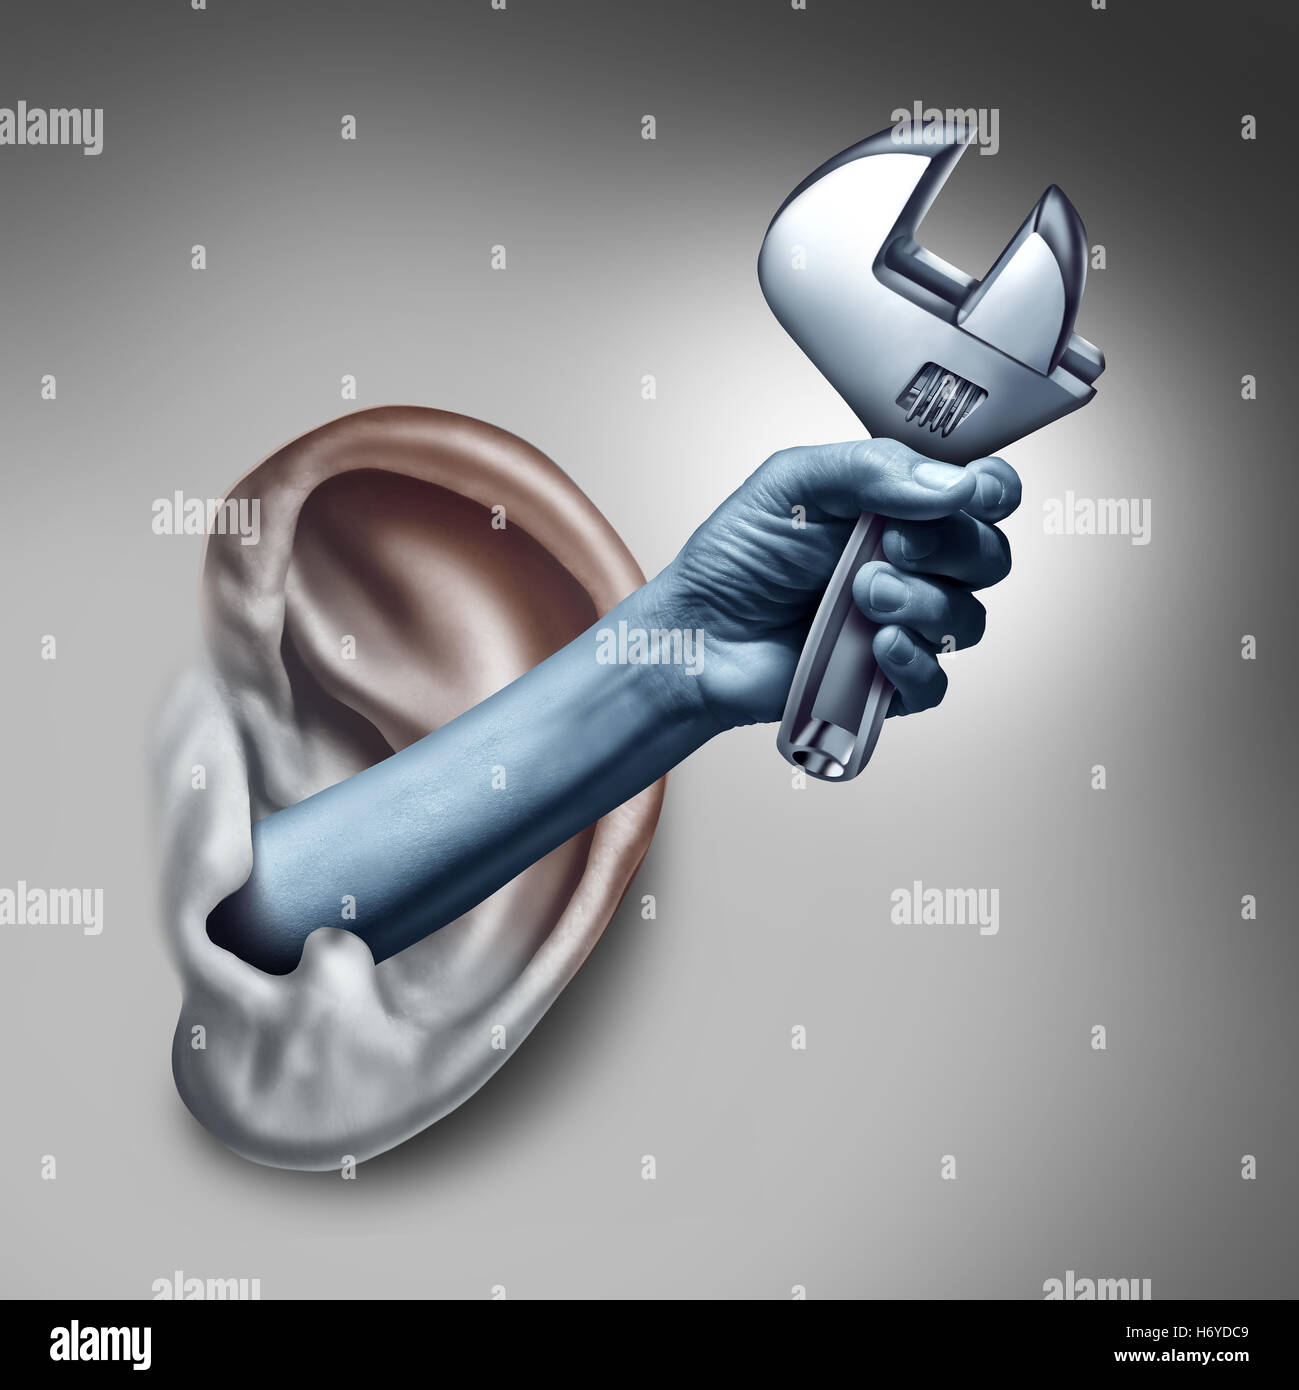 Ear therapy as a medicine medical concept as the hand of a doctor or health specialist treating the human hearing organ as a physician performing an examination for auditory symptoms holding a wrench as a symbol with 3D illustration elements. Stock Photo